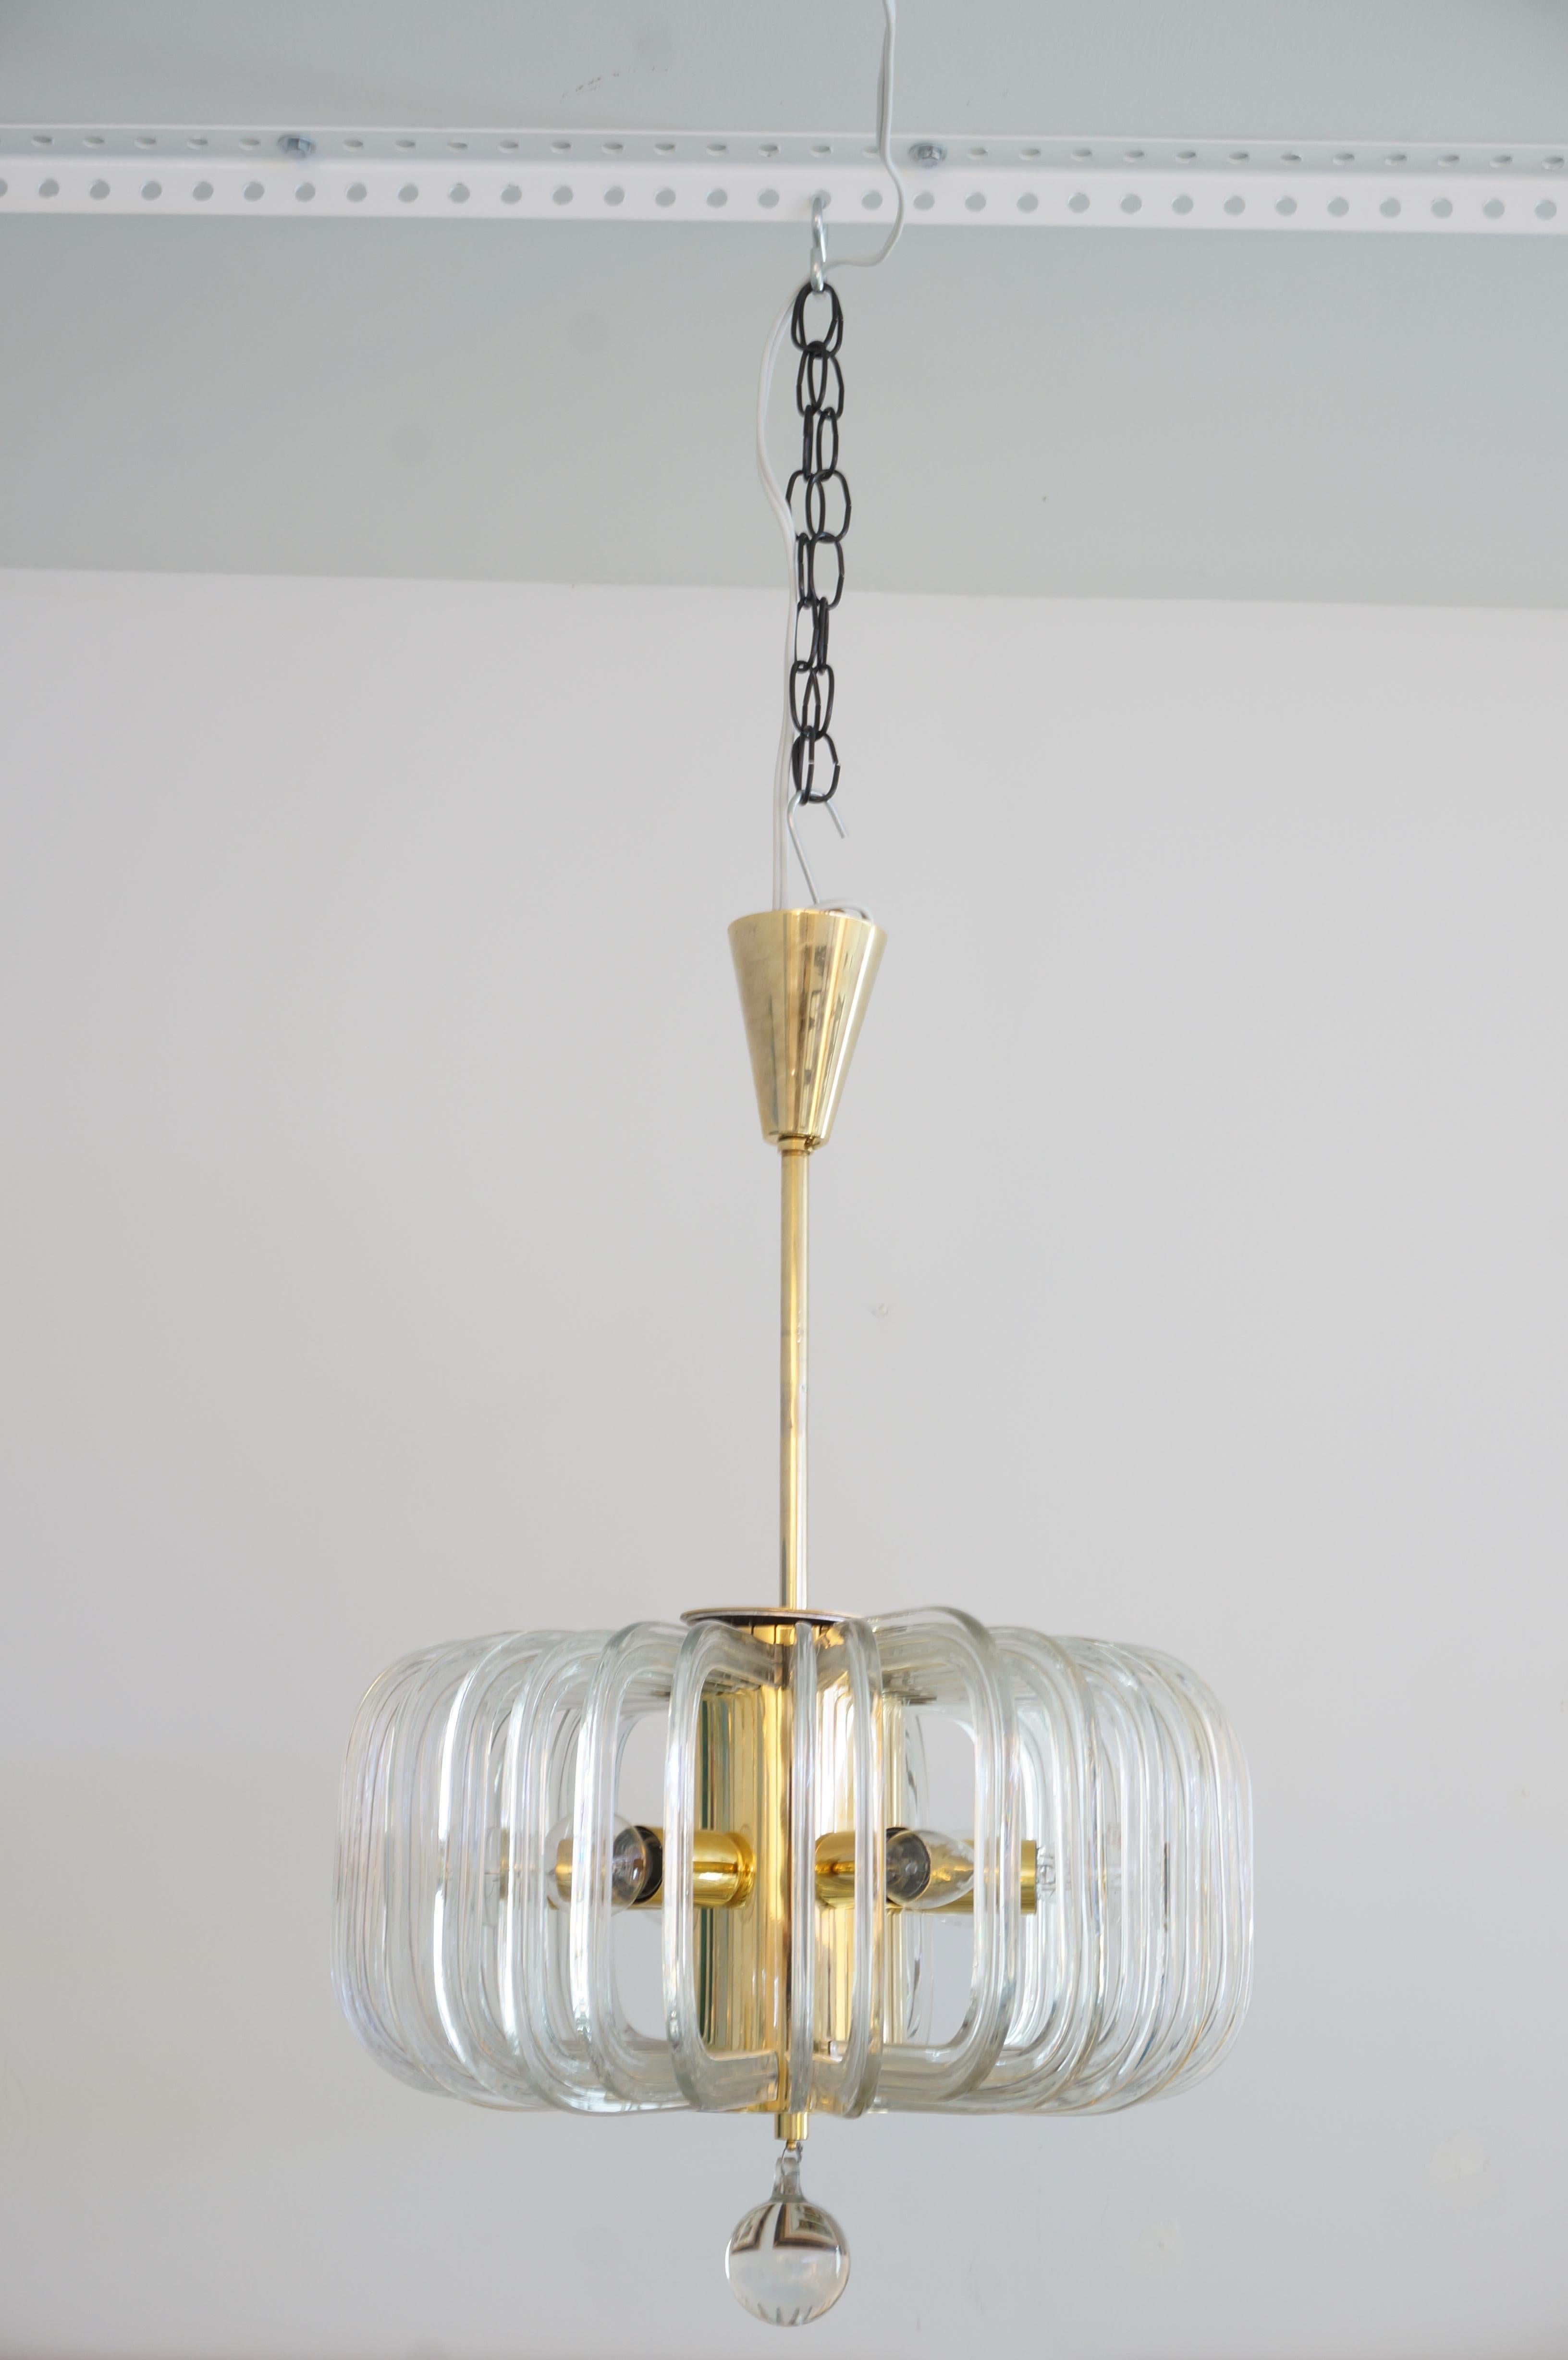 This stylish, chic and rare form Mid-Century Modern chandelier dates to the 1960s. The piece was designed by Cari Zalloni for Bakalowits & Shone of Vienna, Austria.

The quality of this piece is of the highest standards with its form, and use of